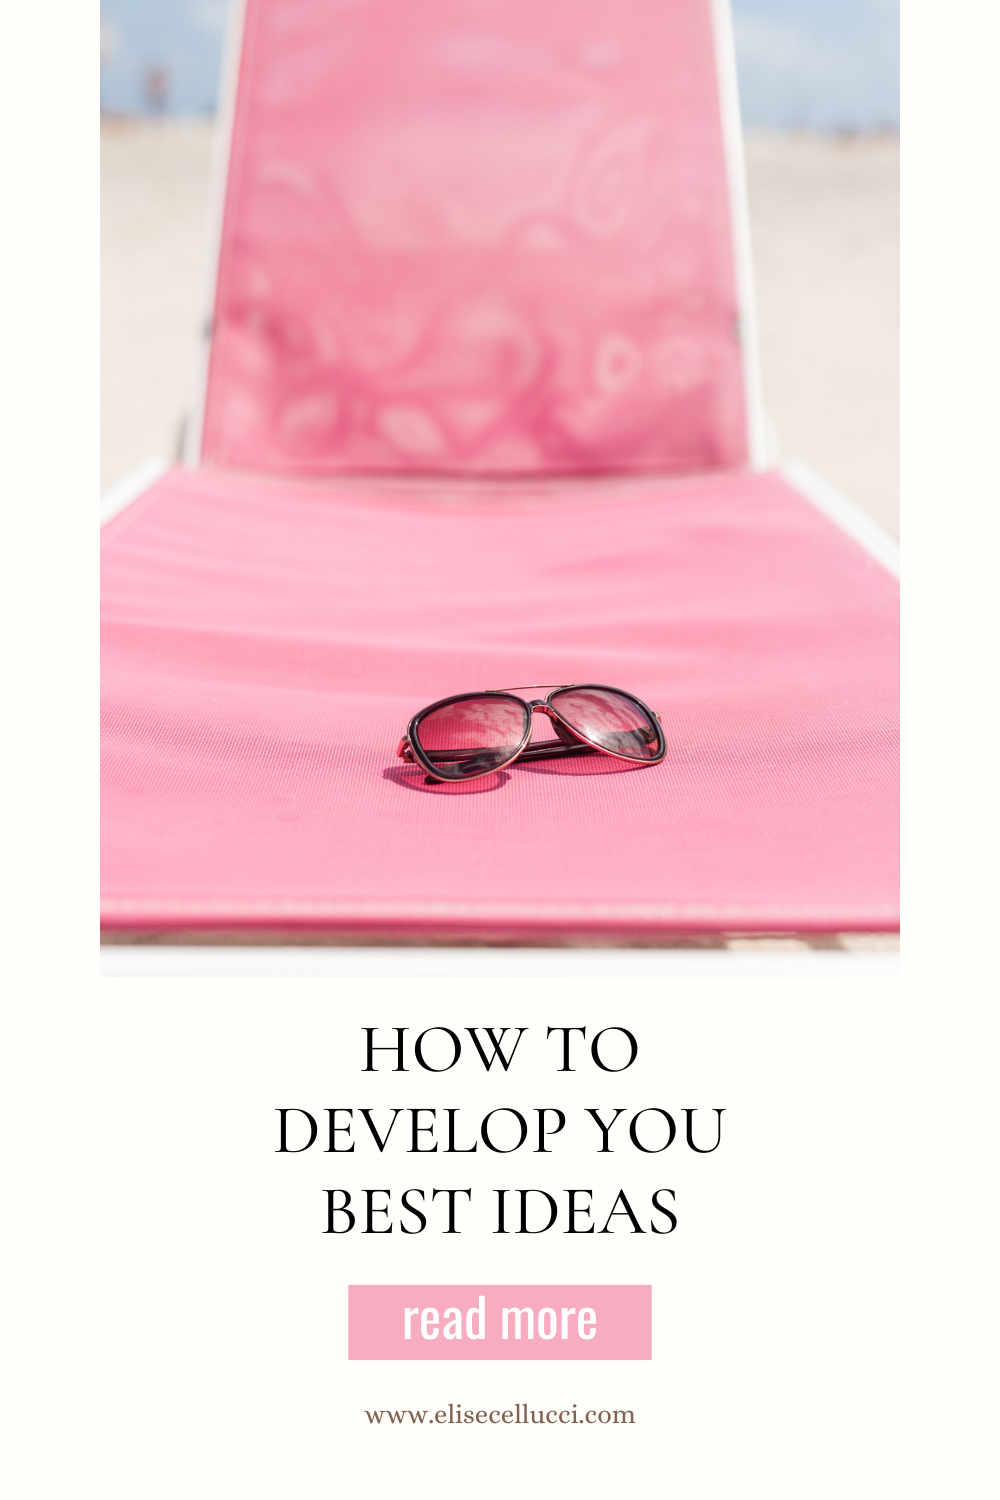 How to develop your best ideas.